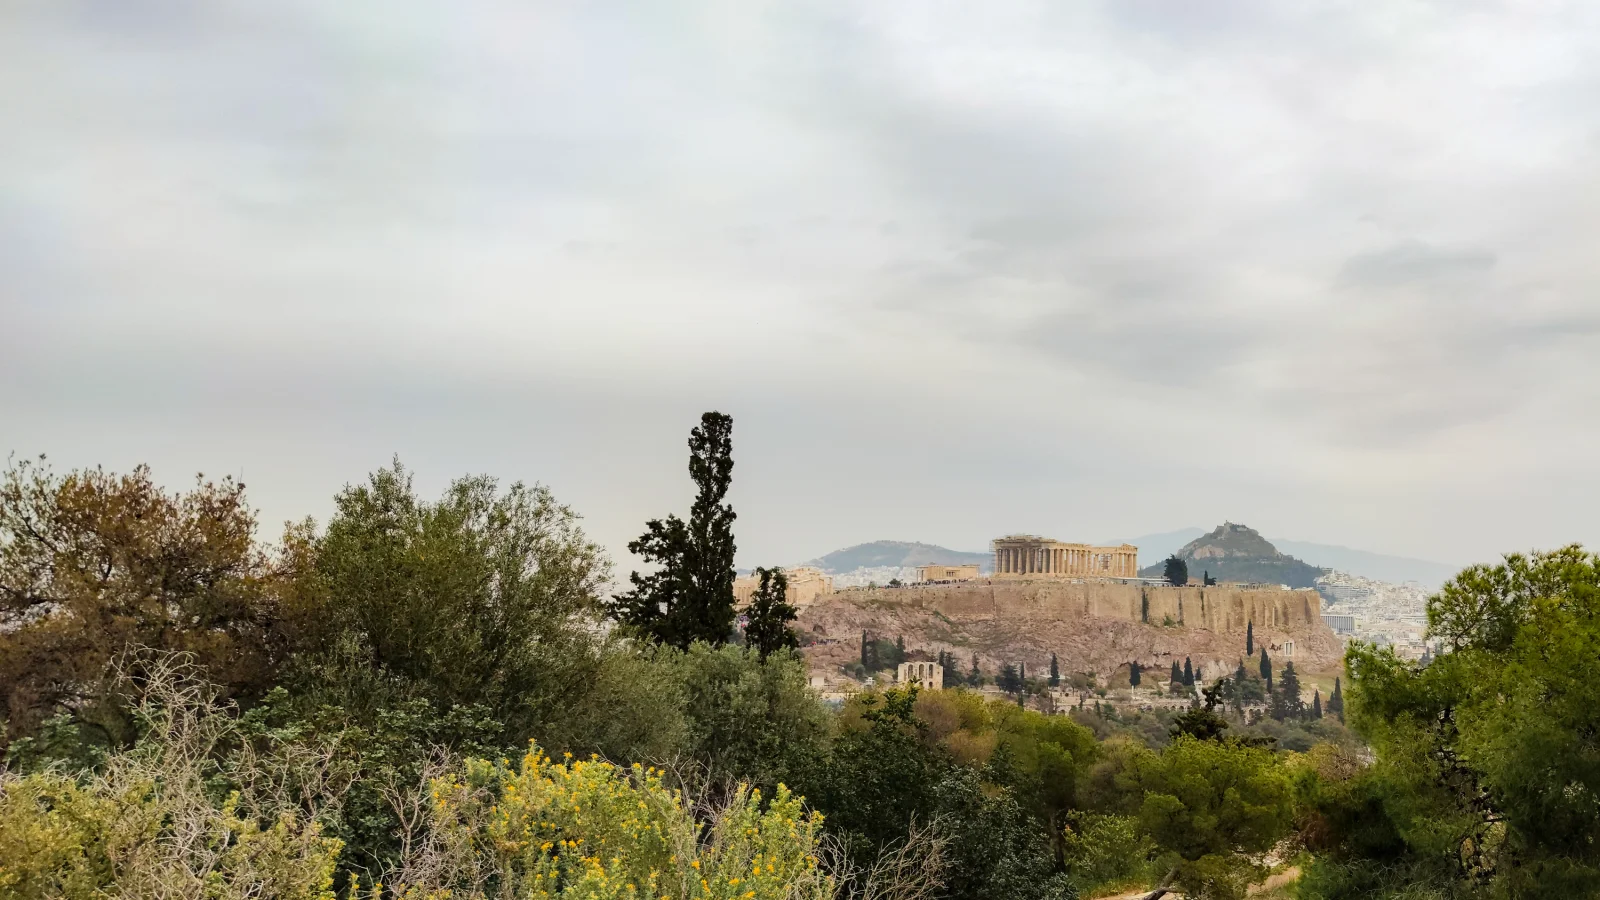 Acropolis seen from Philopappos hill